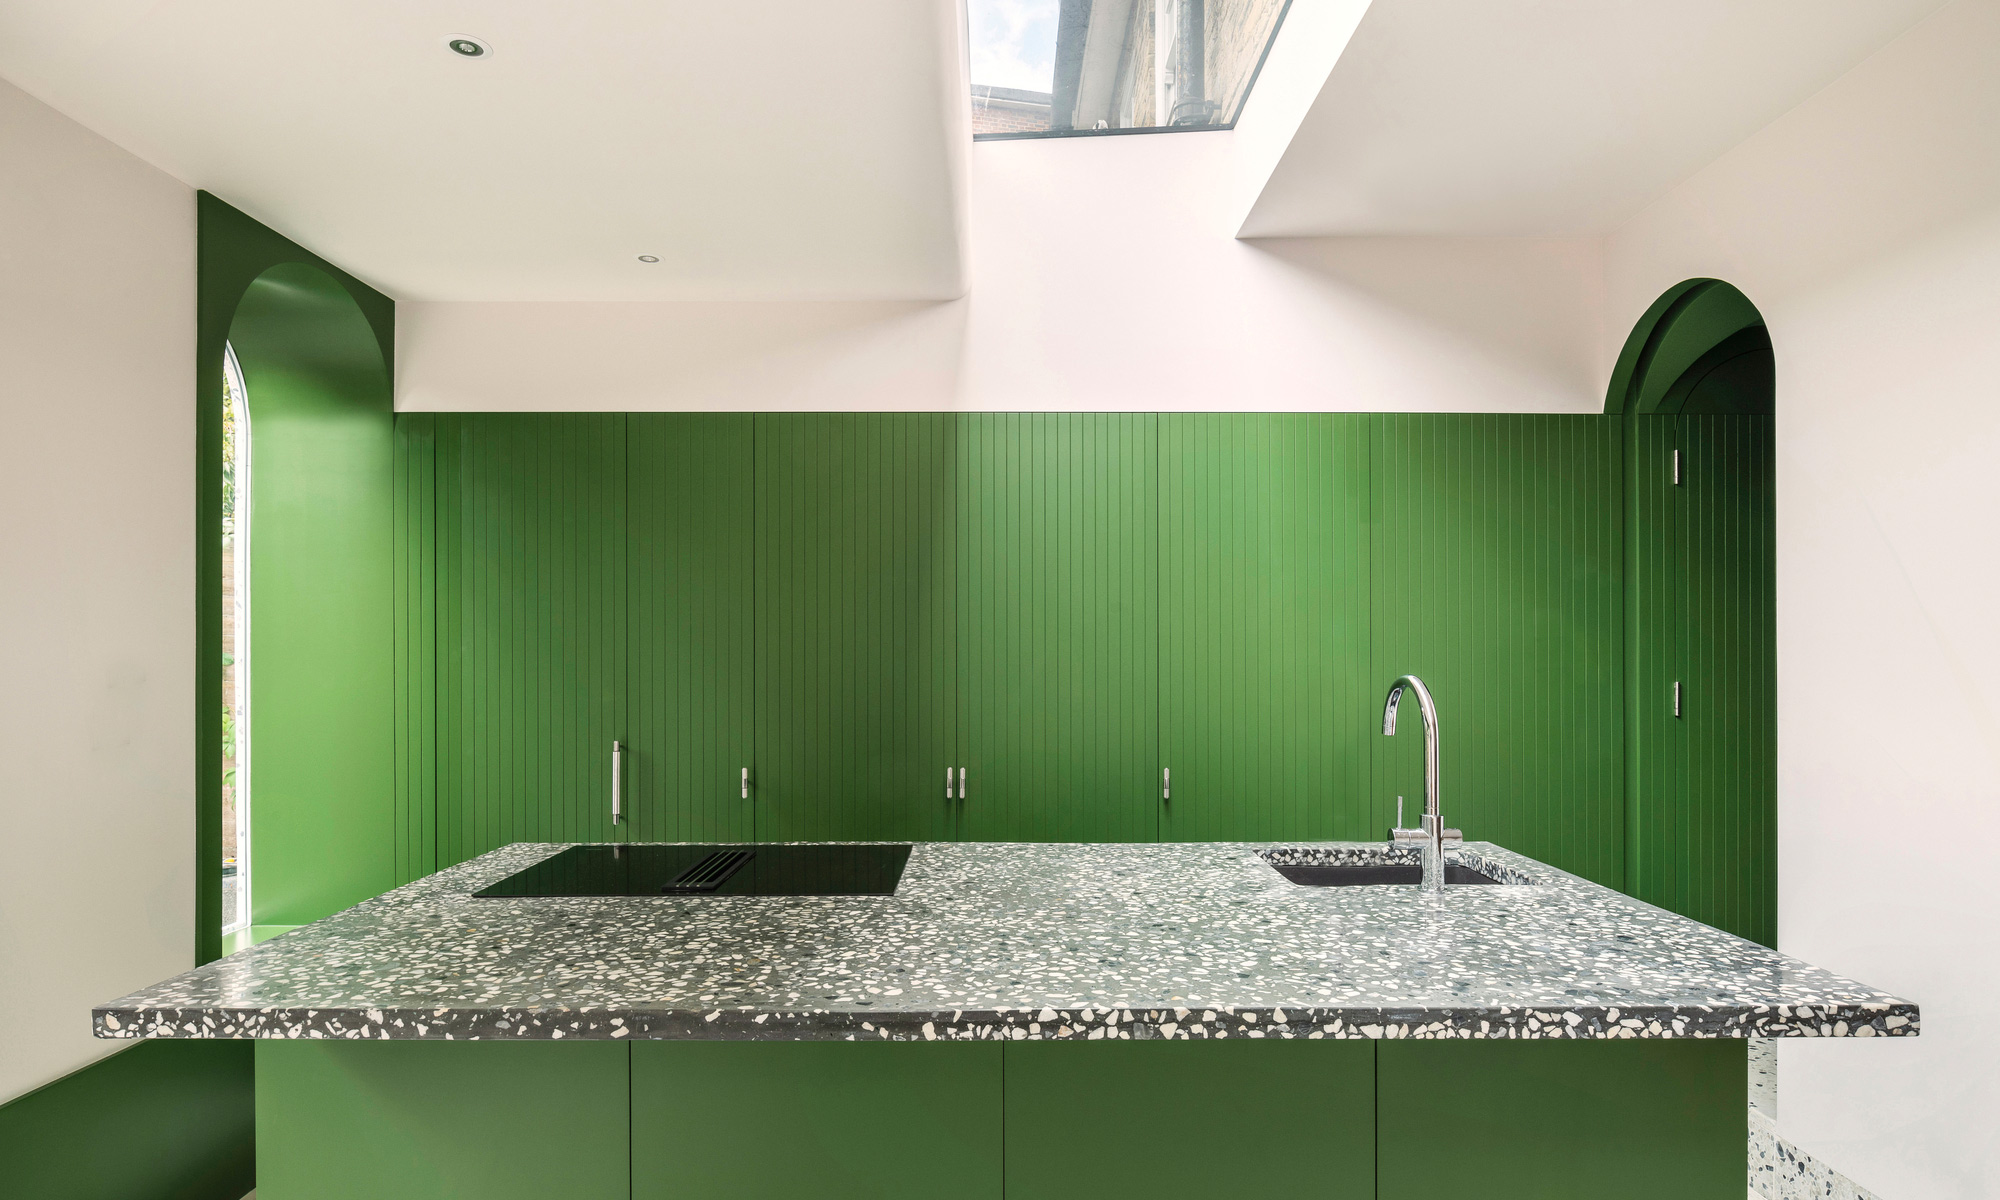 Peppermint bright green kitchen, by Gundry and Ducker,